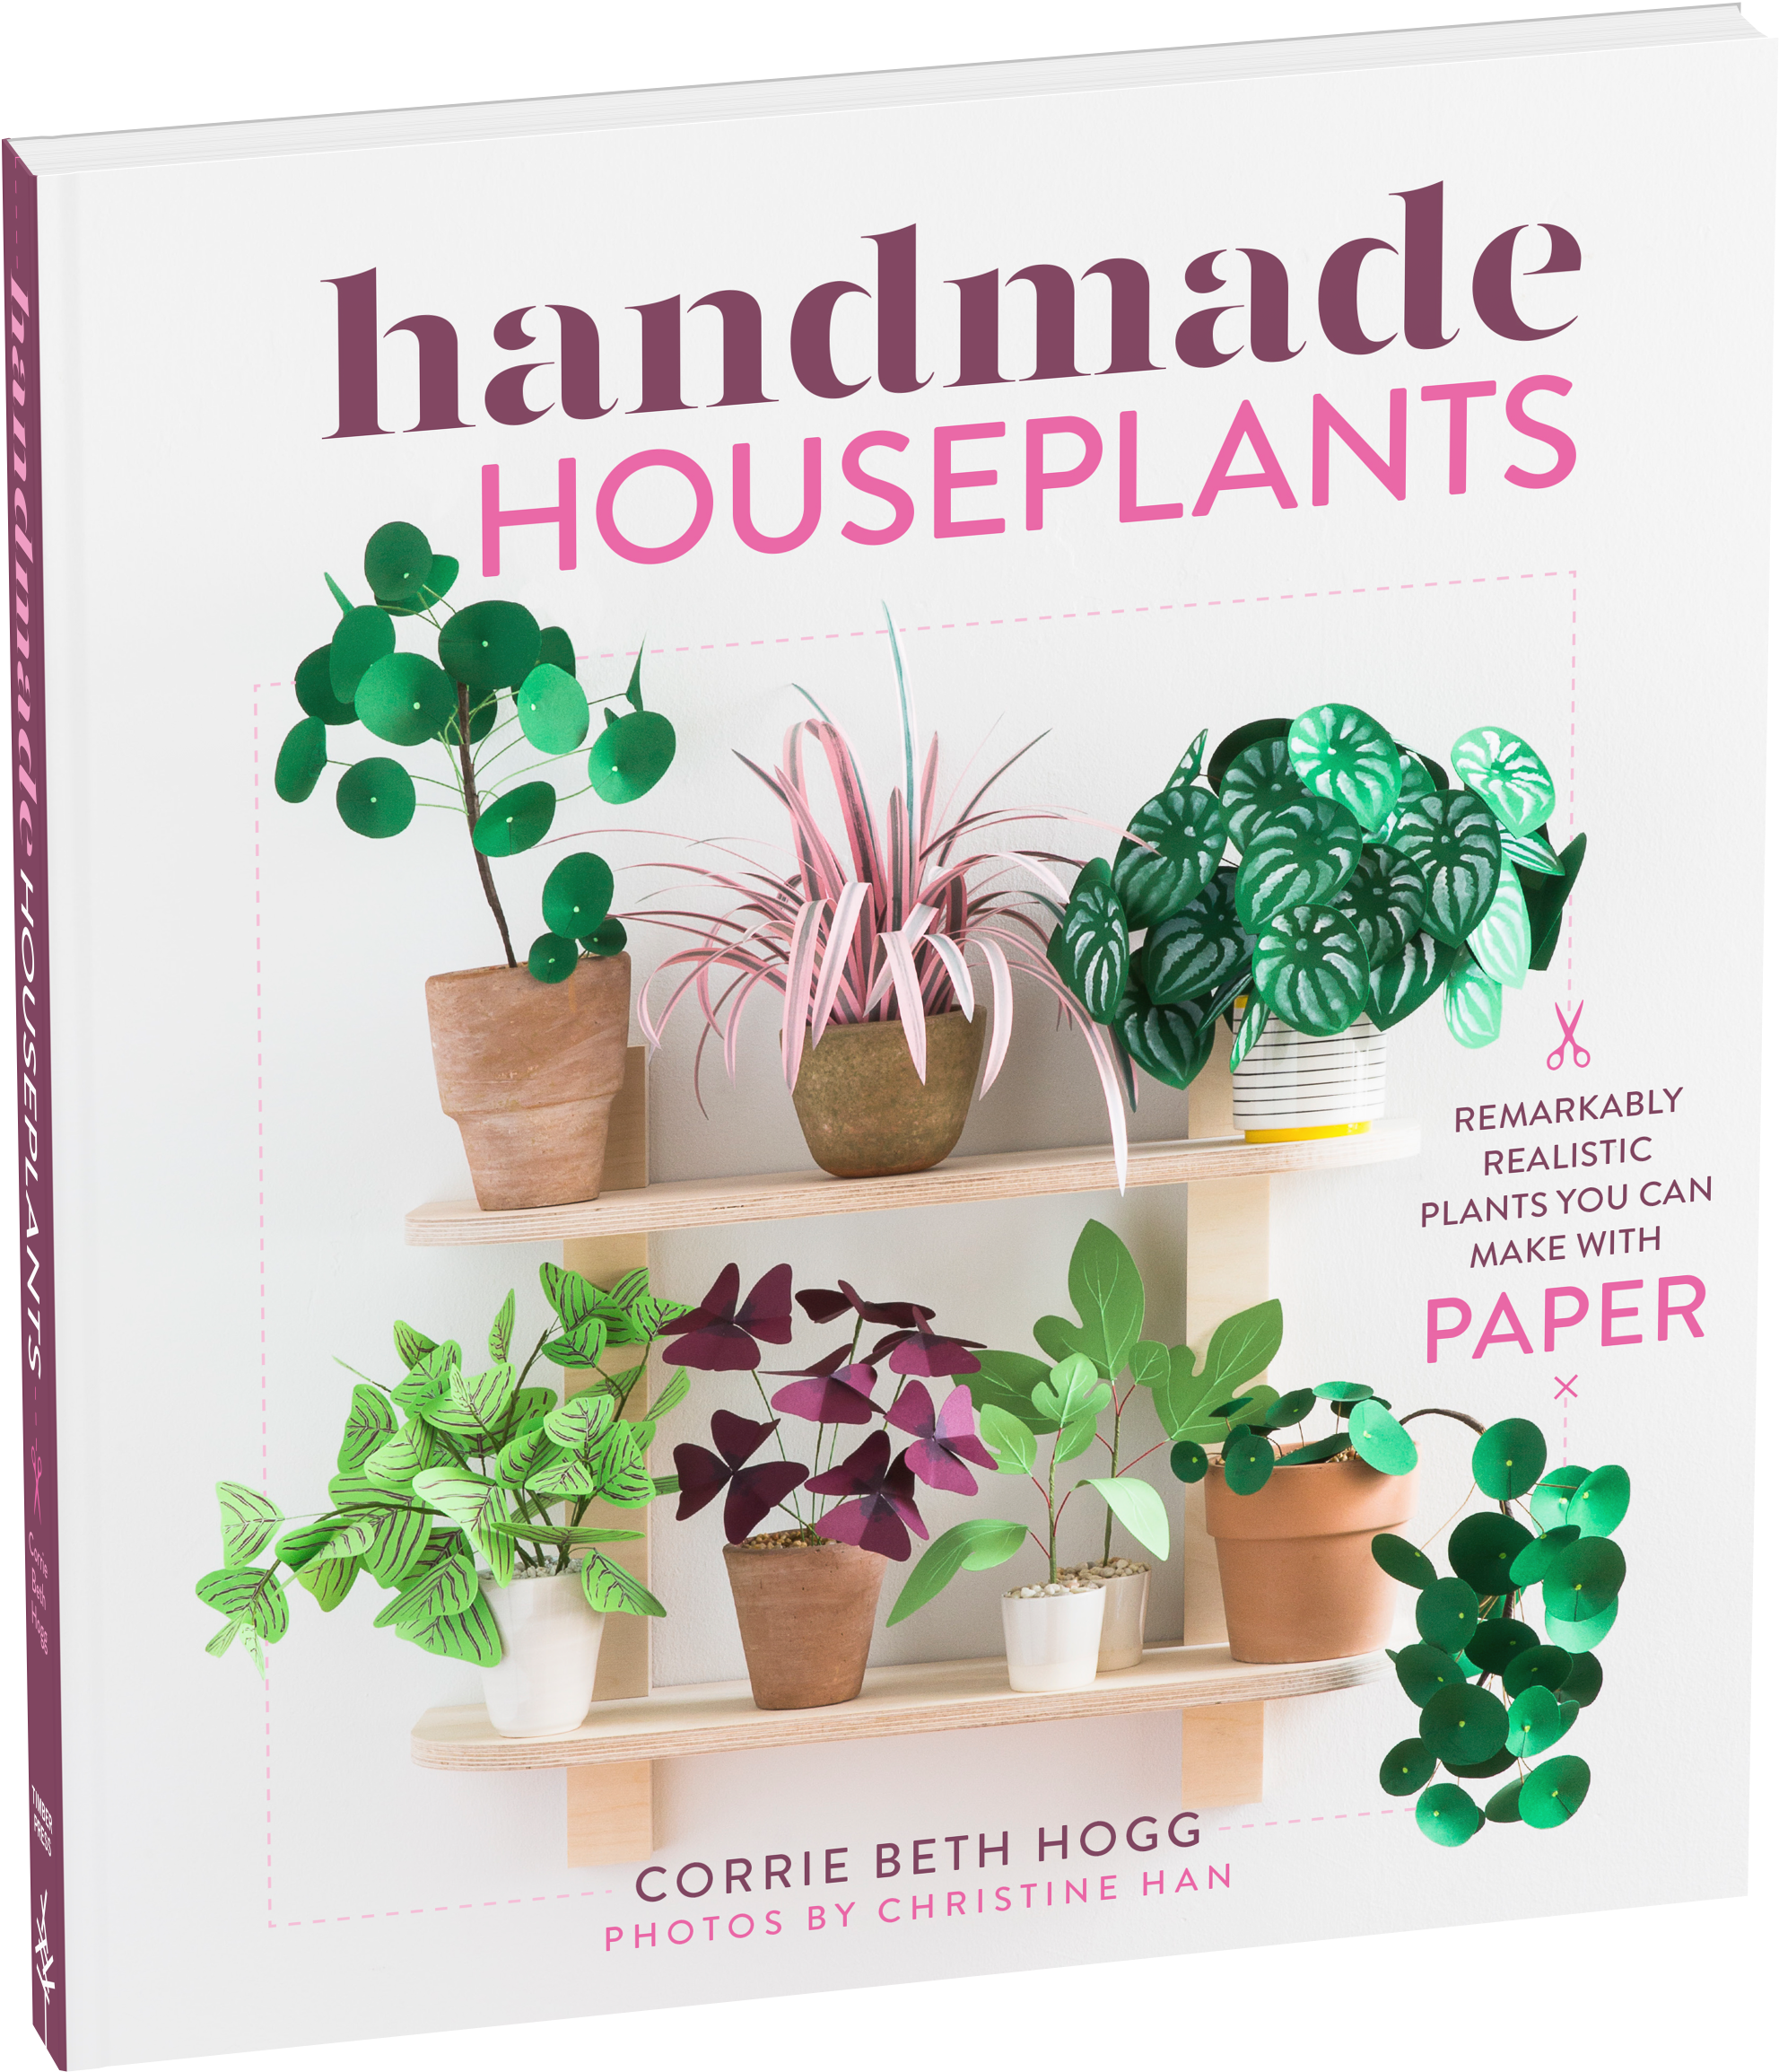 View Full Size Image - Handmade Houseplants (2000x2330), Png Download